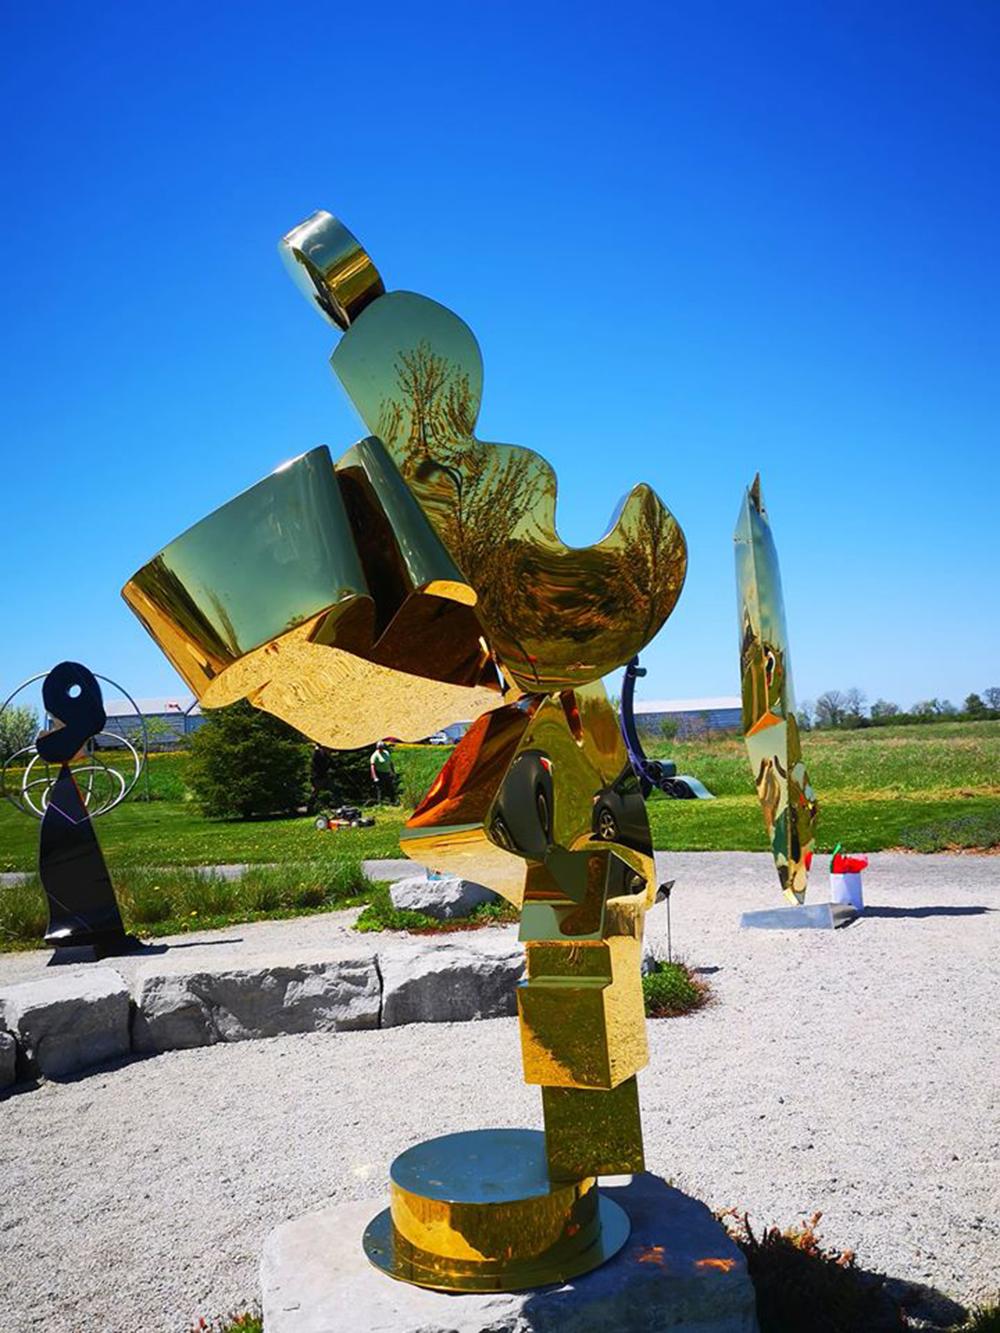 Celestial - tall, post-pop, abstract, gold plated steel, outdoor sculpture - Green Abstract Sculpture by Viktor Mitic